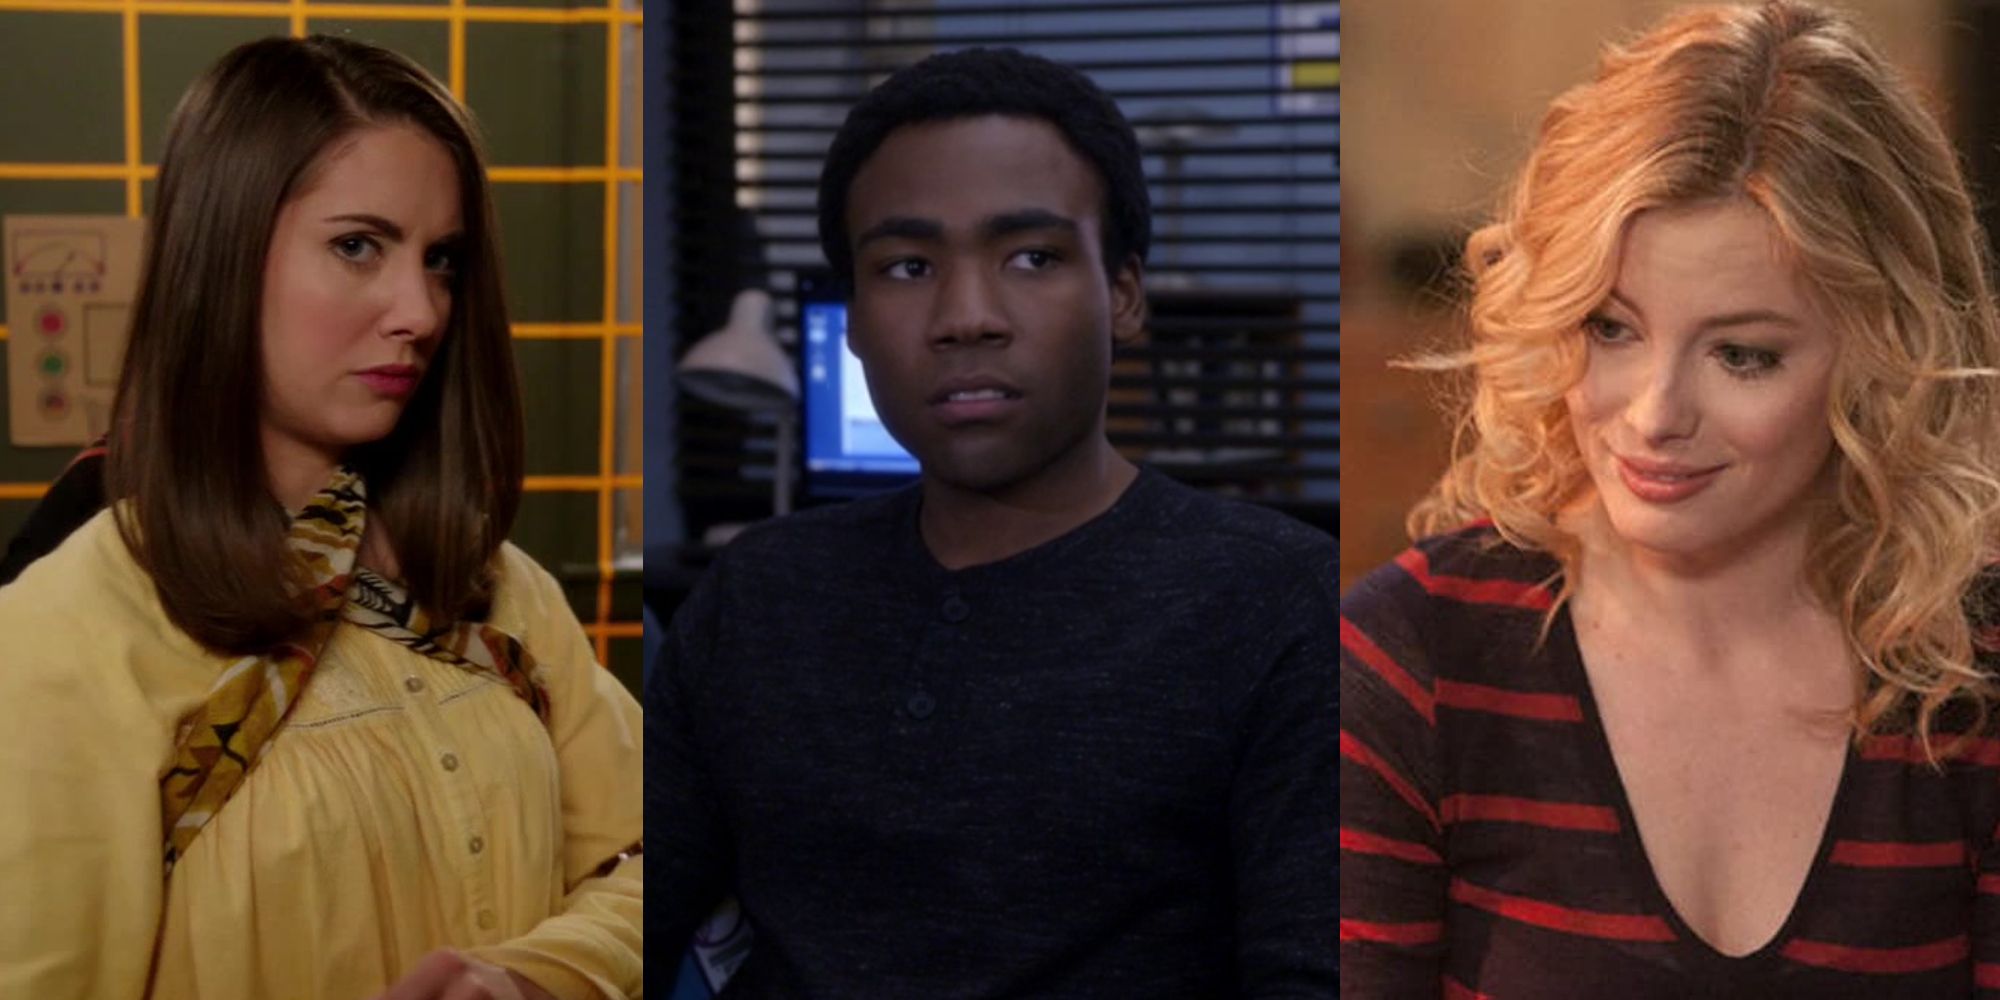 Annie dressed for Abed's simulation; Troy sitting at the study table; Britta staring at Troy